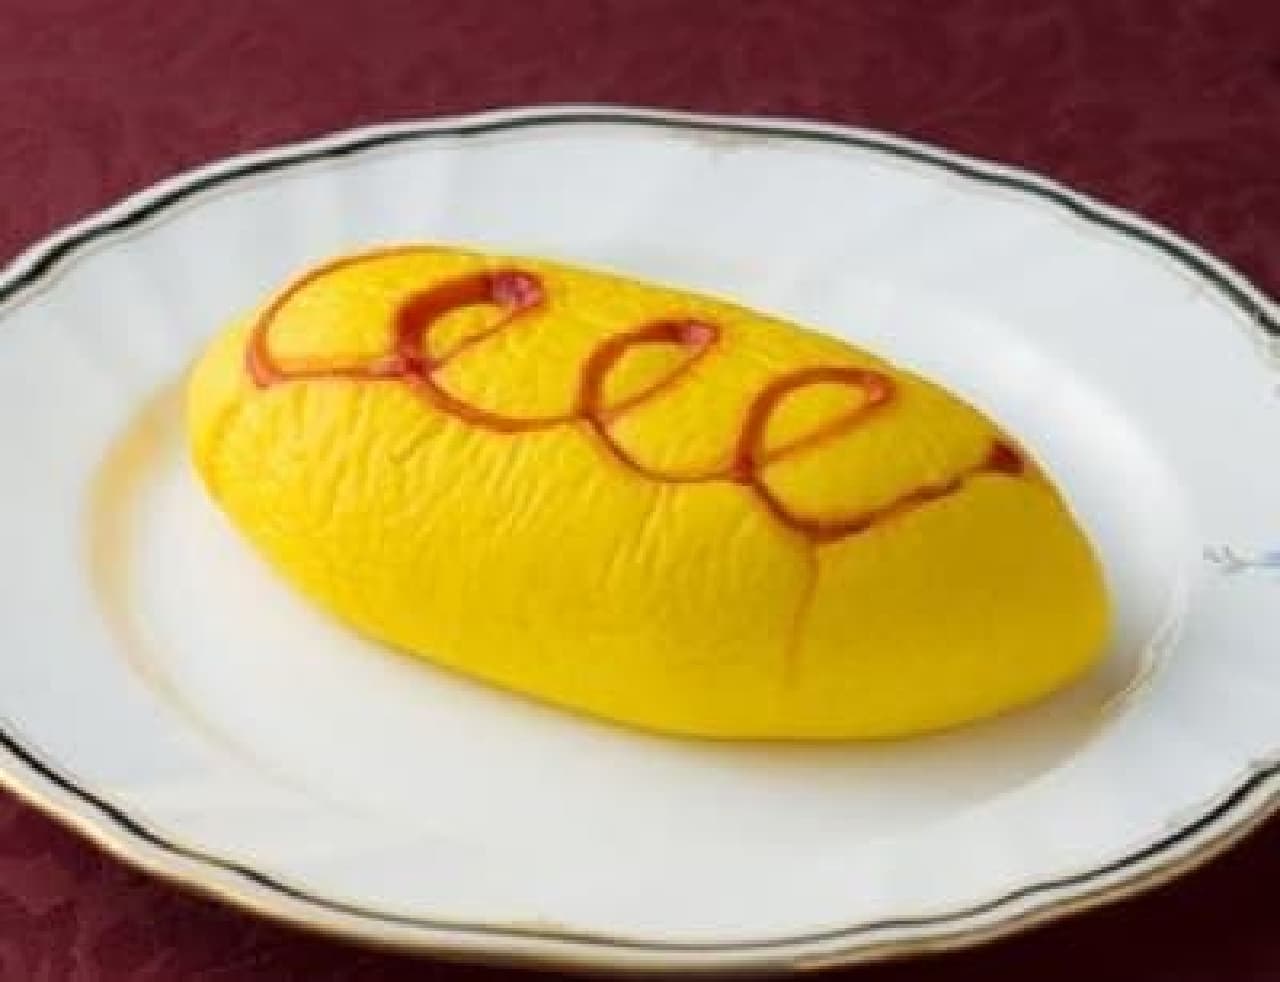 Just like the real thing! "Omurice bread"